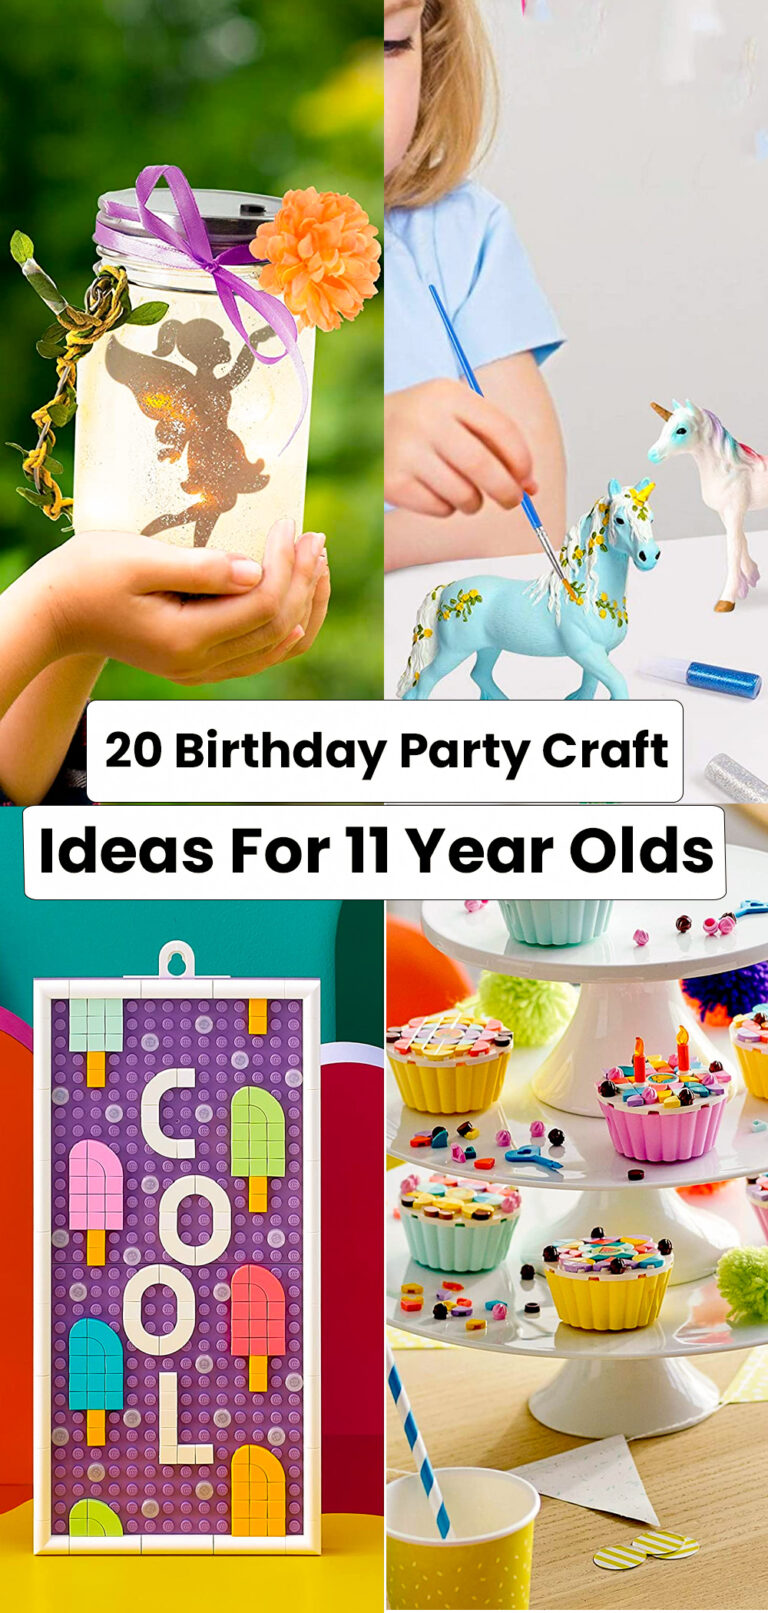 13 Birthday Party Craft Ideas for 11 Year Olds